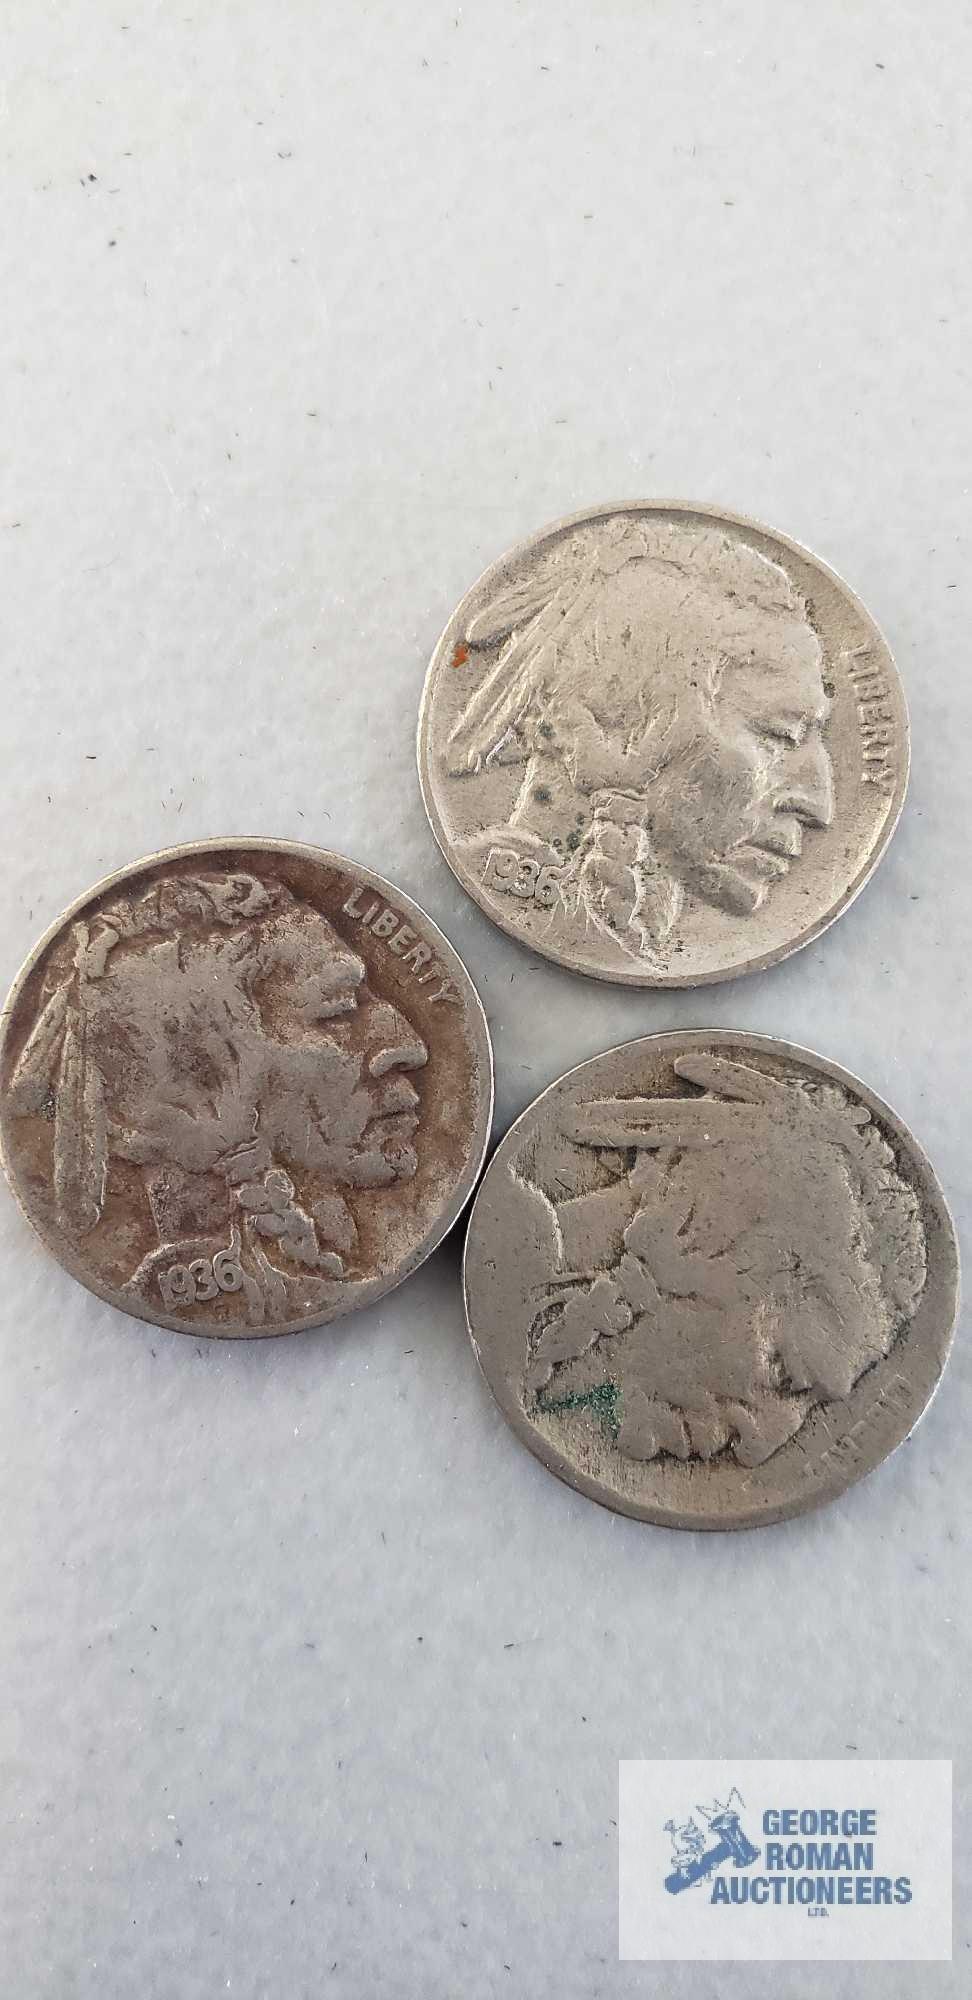 Three buffalo nickels, two indian head pennies, and one wheat penny